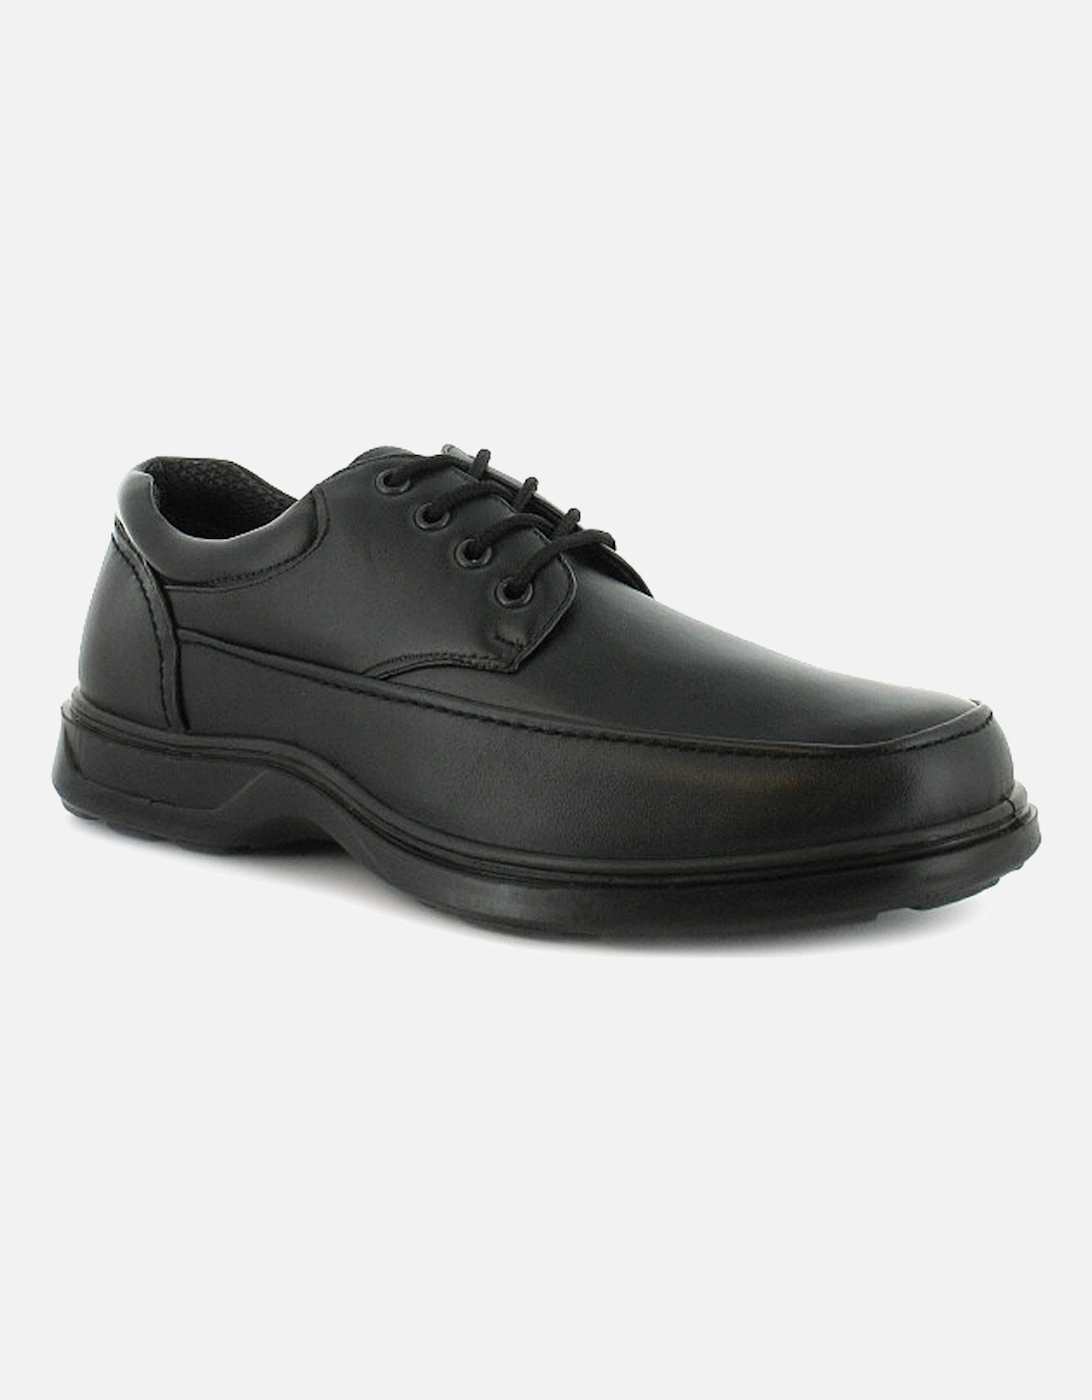 Mens Smart Shoes Freddy Lace Up black UK Size, 6 of 5